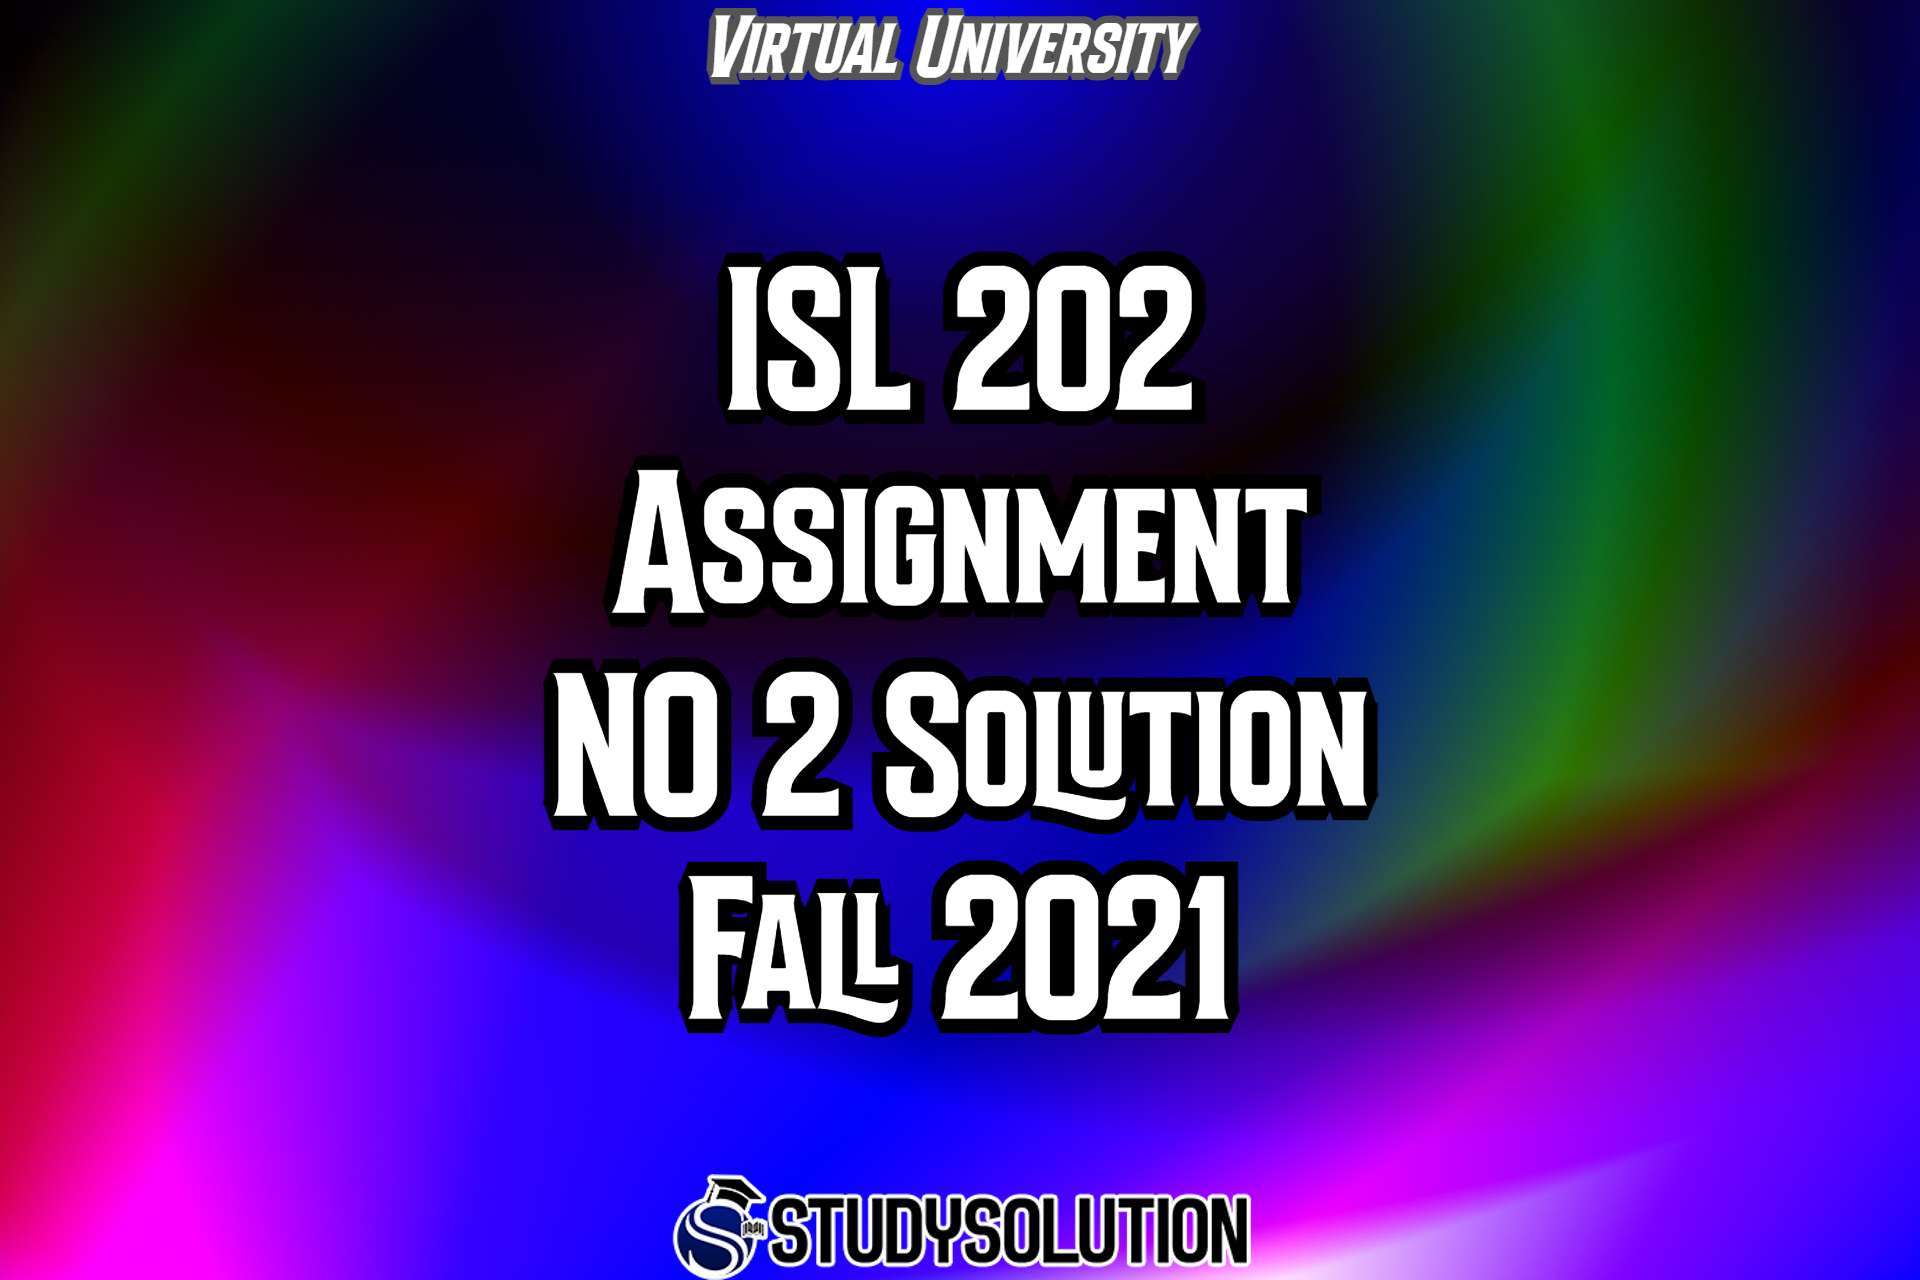 ISL202 Assignment No 2 Solution Fall 2021